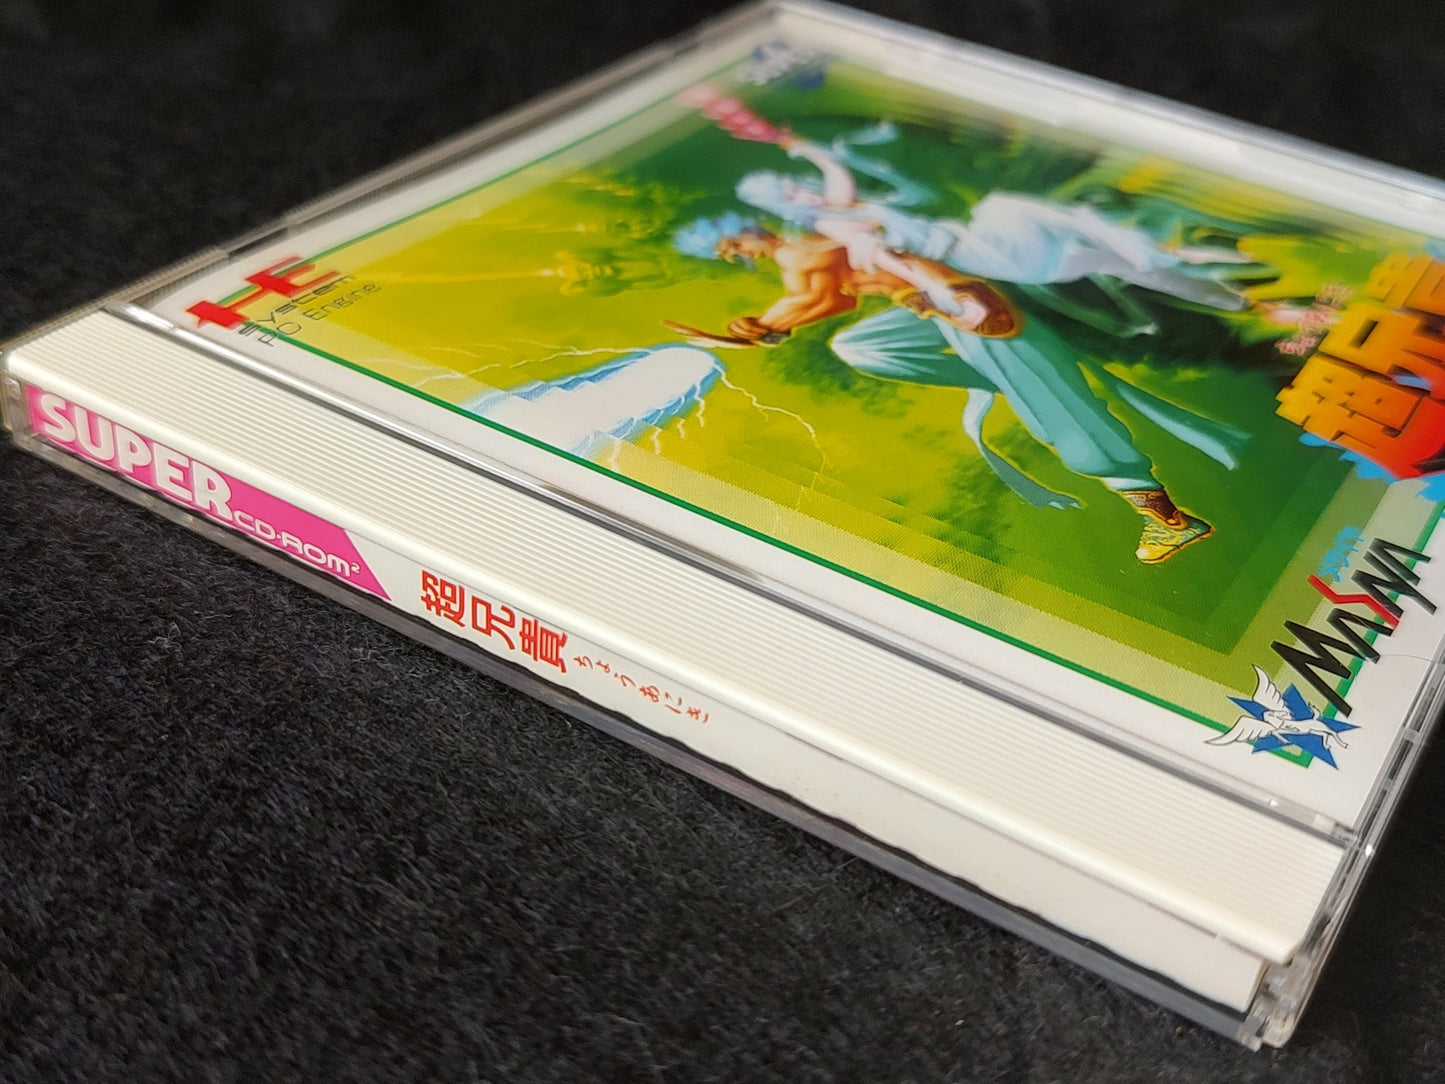 Cho Aniki PC Engine CD-ROM2 Game, w/Spine card, Manual, Case, Working-f0629-2